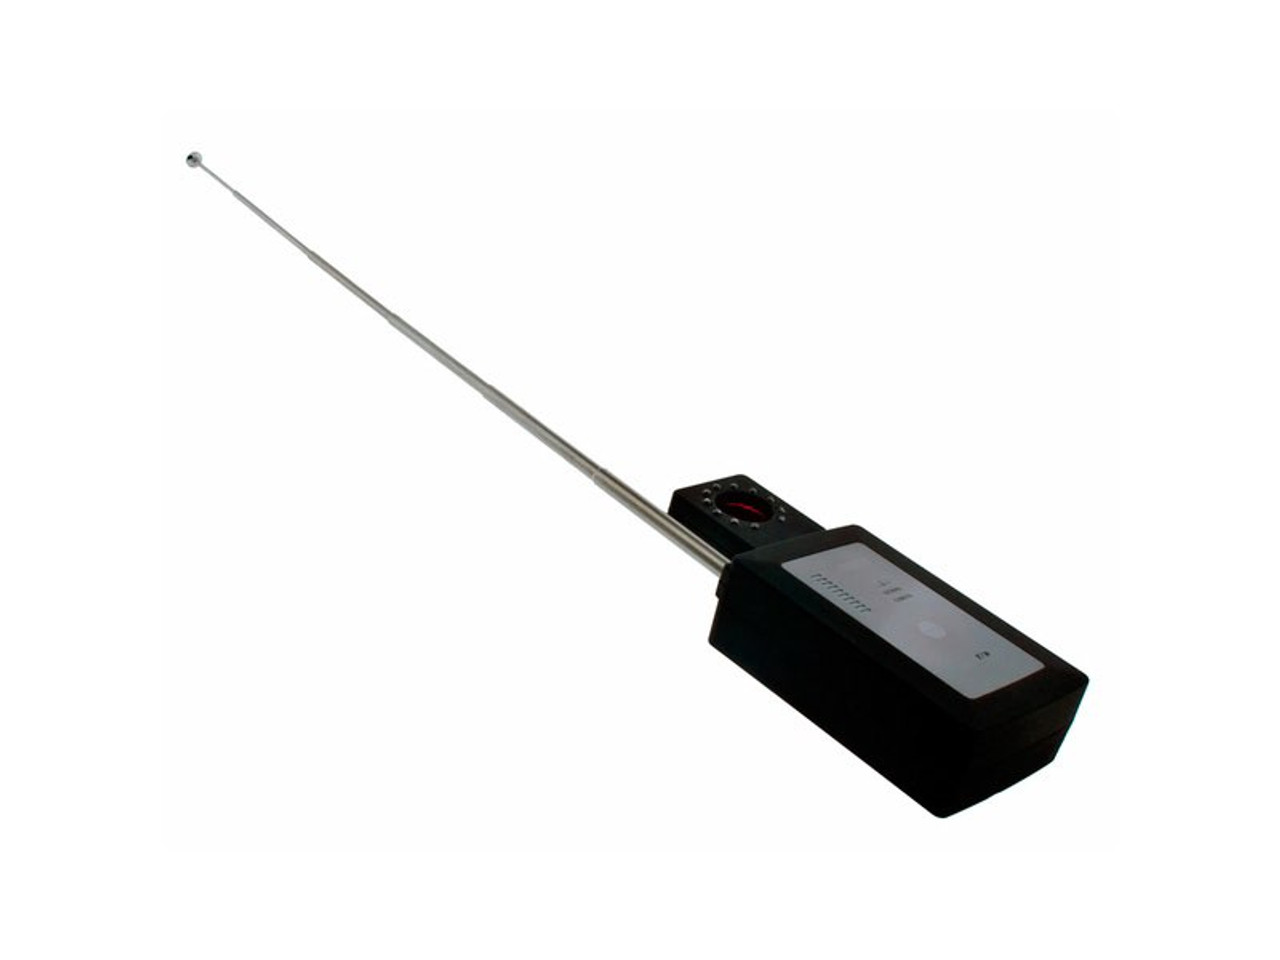 A black personal bug detector with antennae